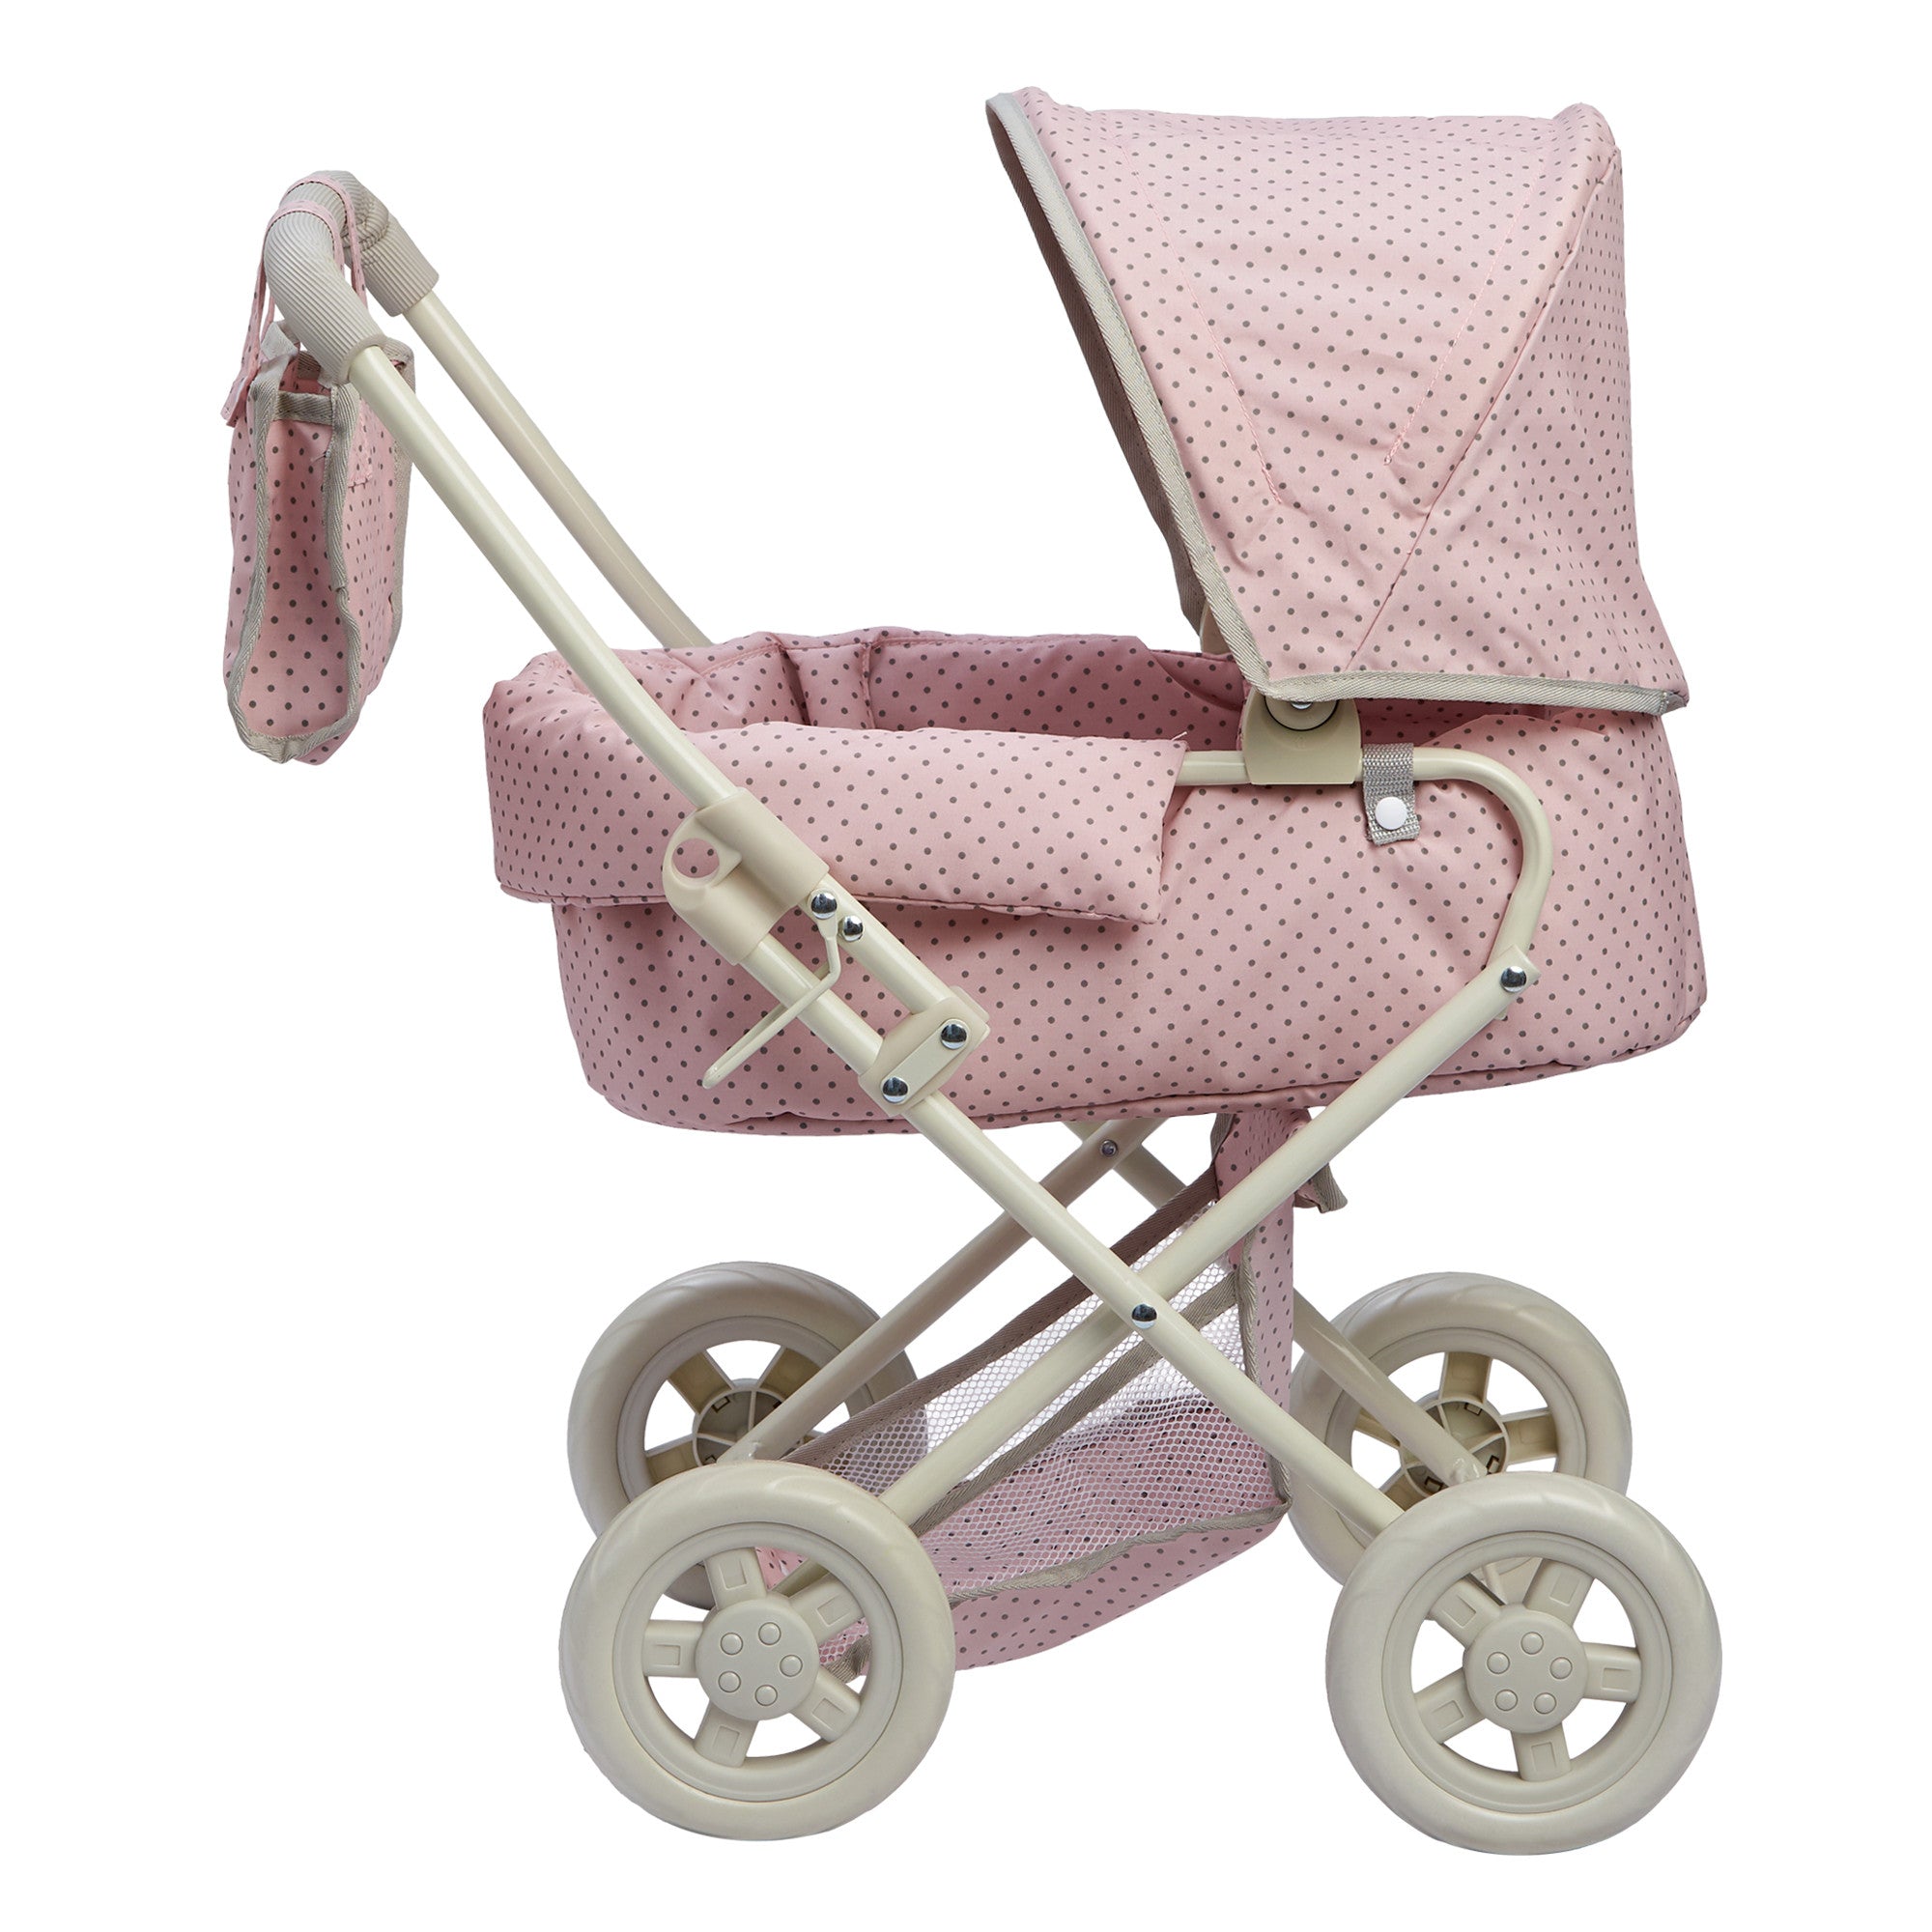 Olivia's Little World Polka Dots Princess Deluxe Baby Doll Stroller, Pink